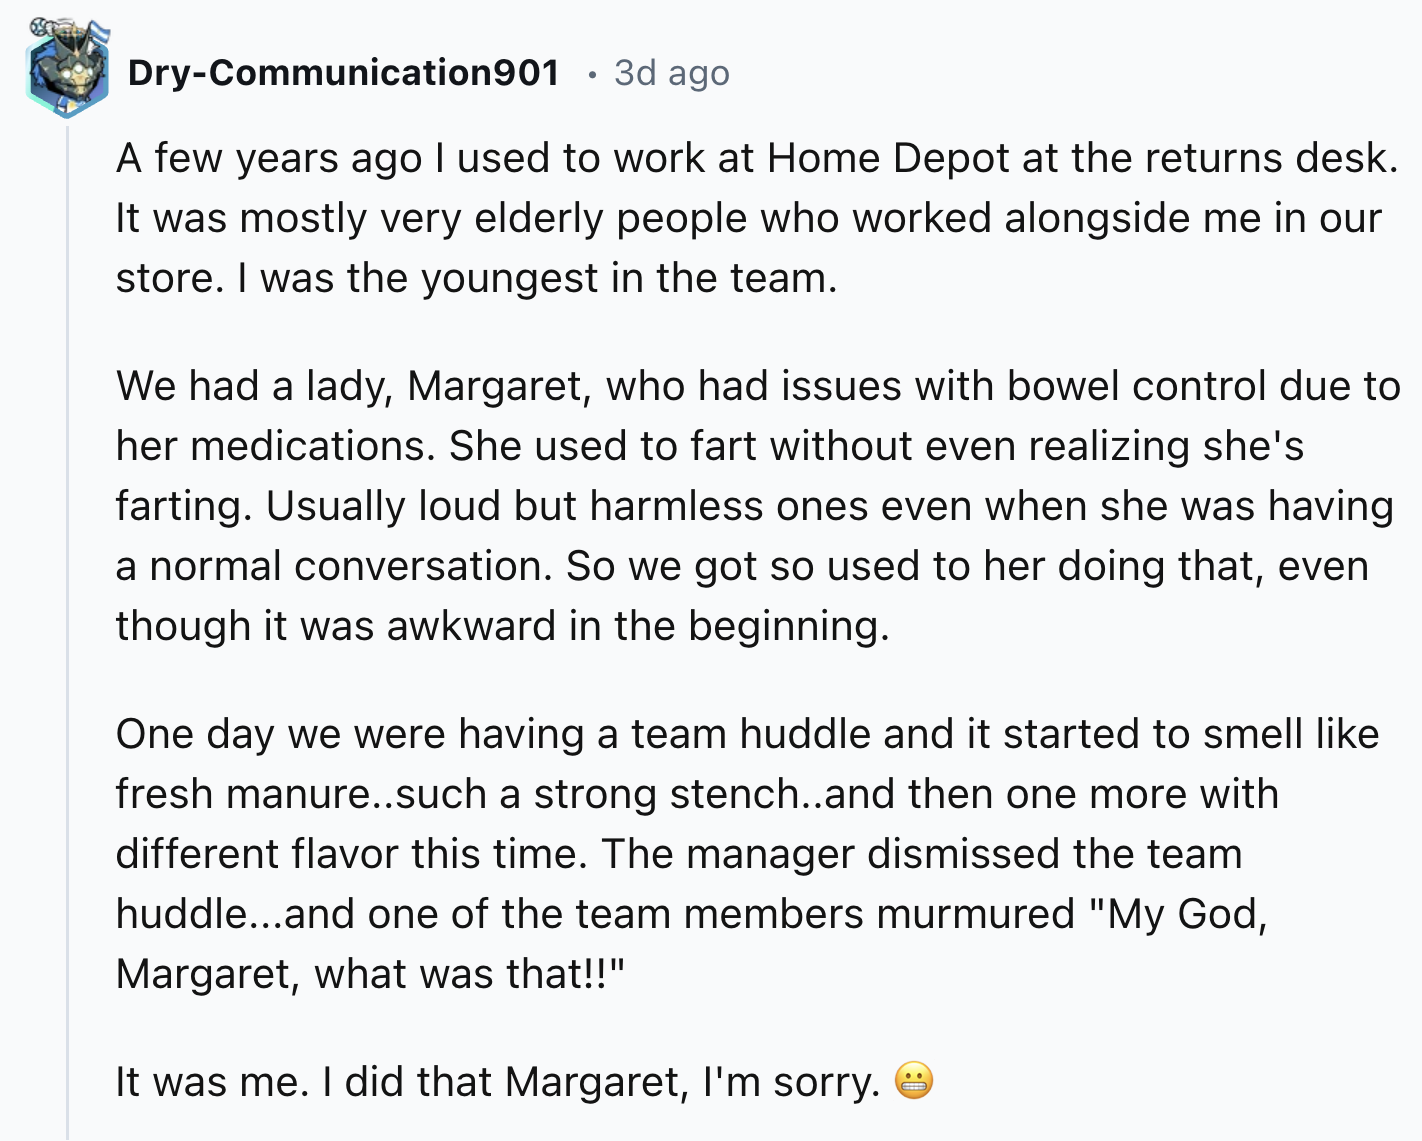 document - DryCommunication901 3d ago A few years ago I used to work at Home Depot at the returns desk. It was mostly very elderly people who worked alongside me in our store. I was the youngest in the team. We had a lady, Margaret, who had issues with bo